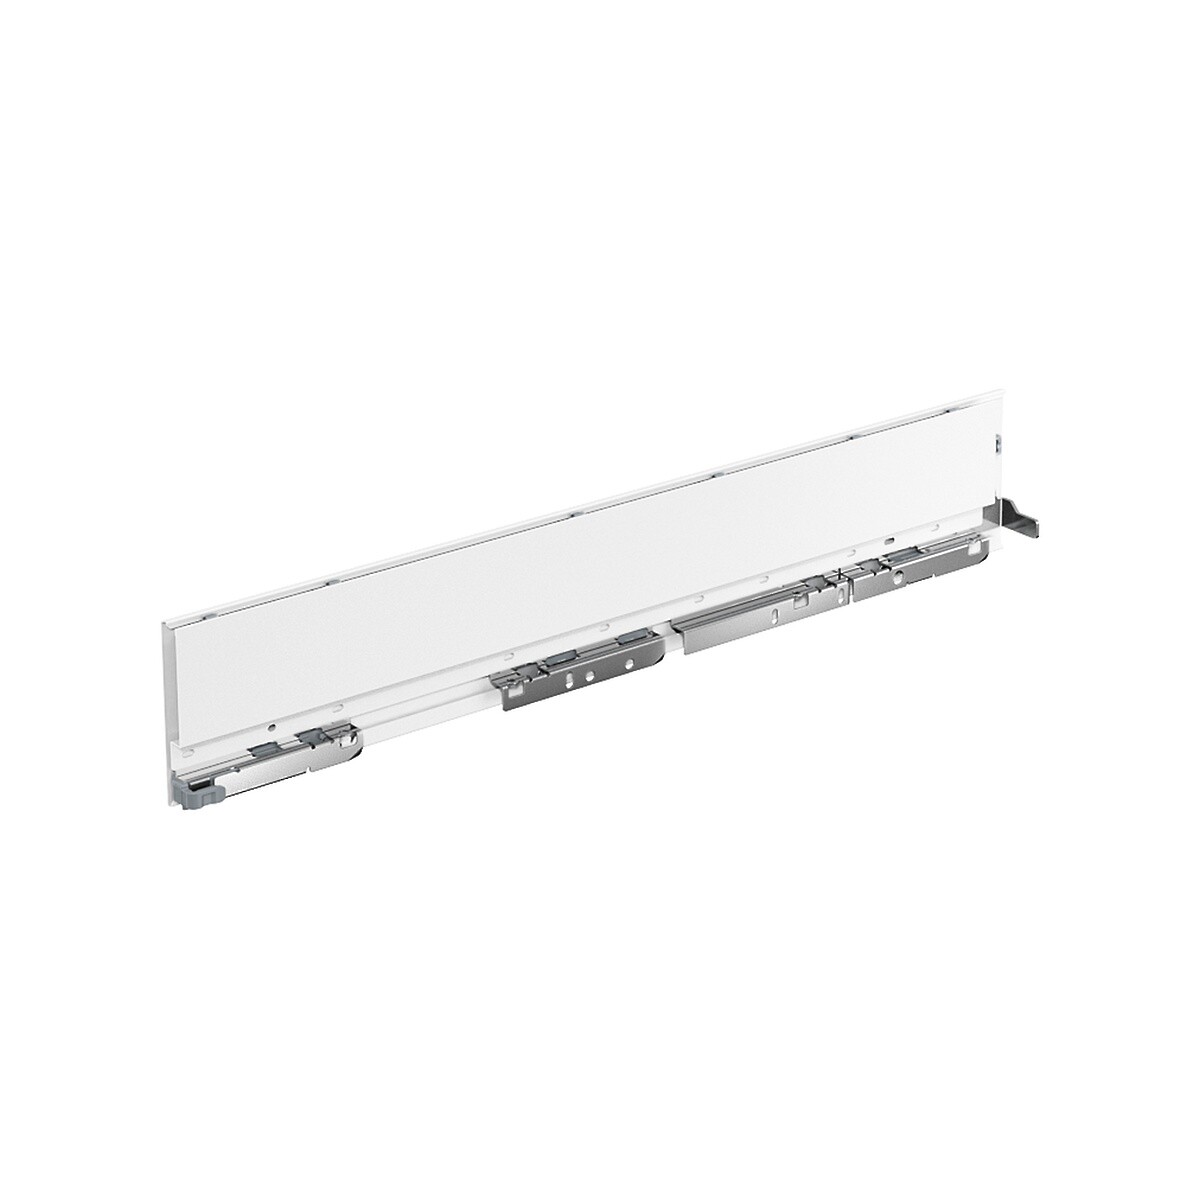 AvanTech YOU Drawer side profile, height 101 mm x NL 270 mm, White, Right